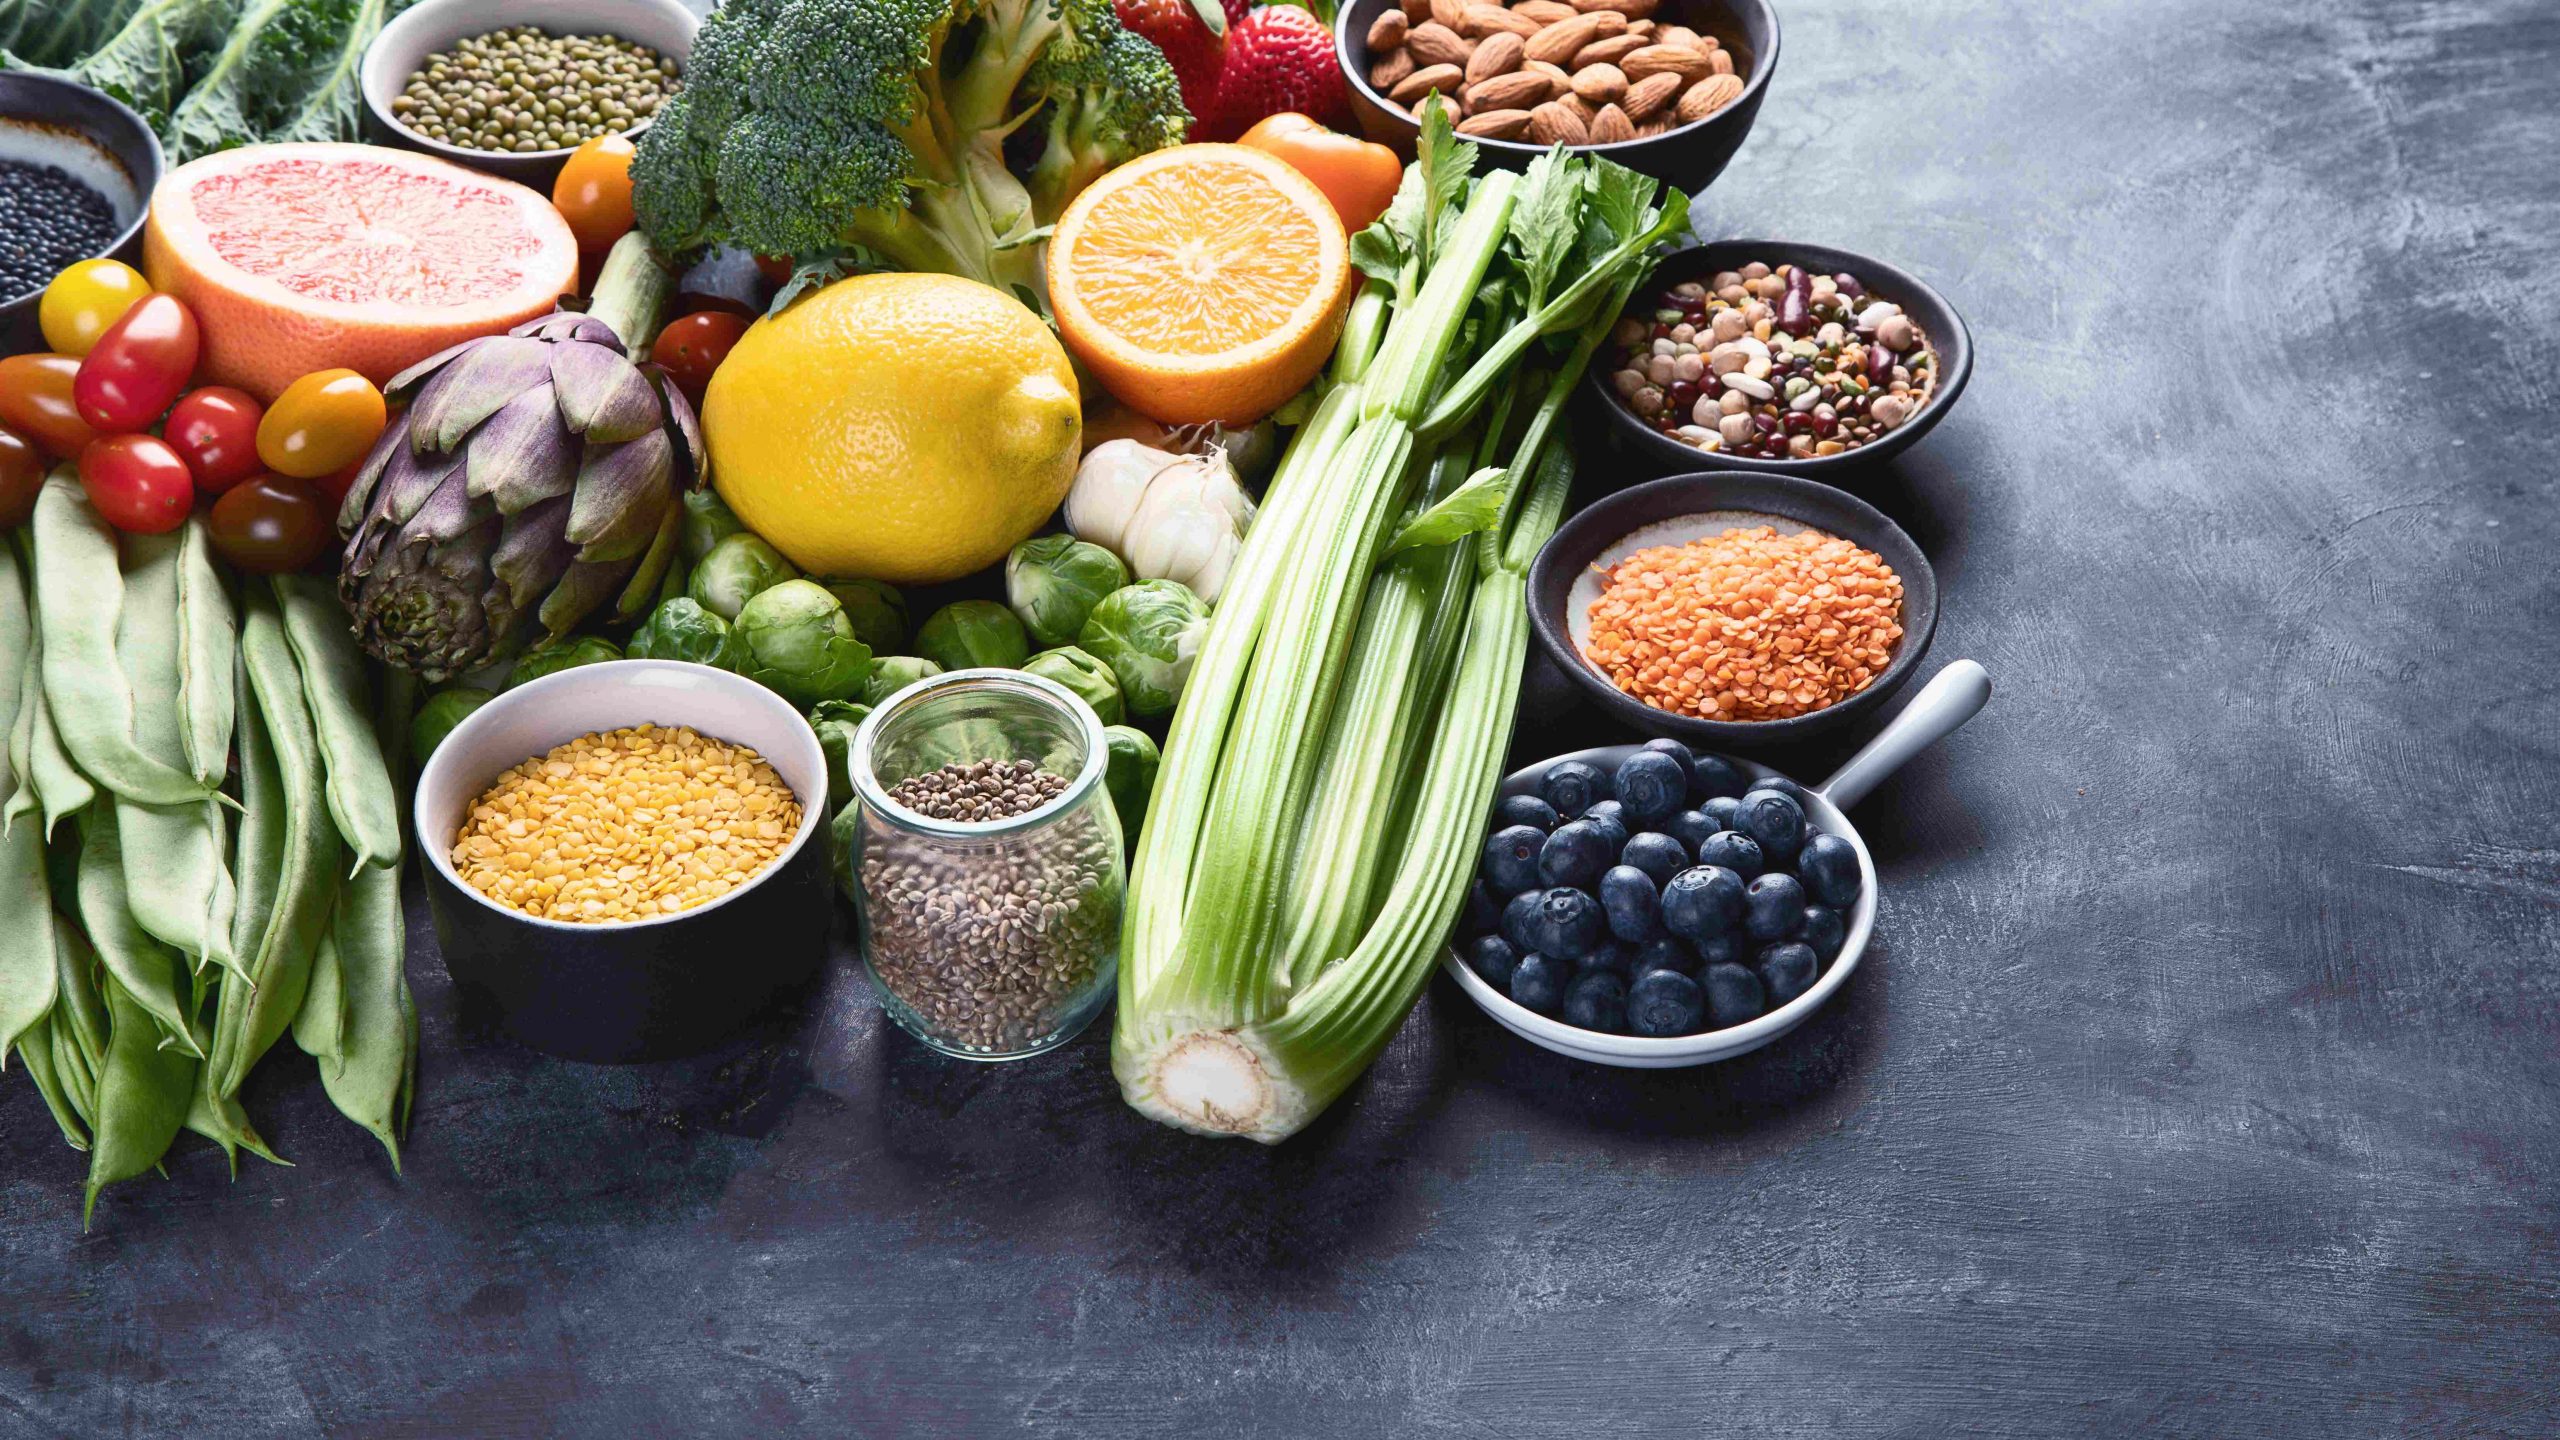 Study: Plant-Based Diet Has Positive Effect on Heart Health